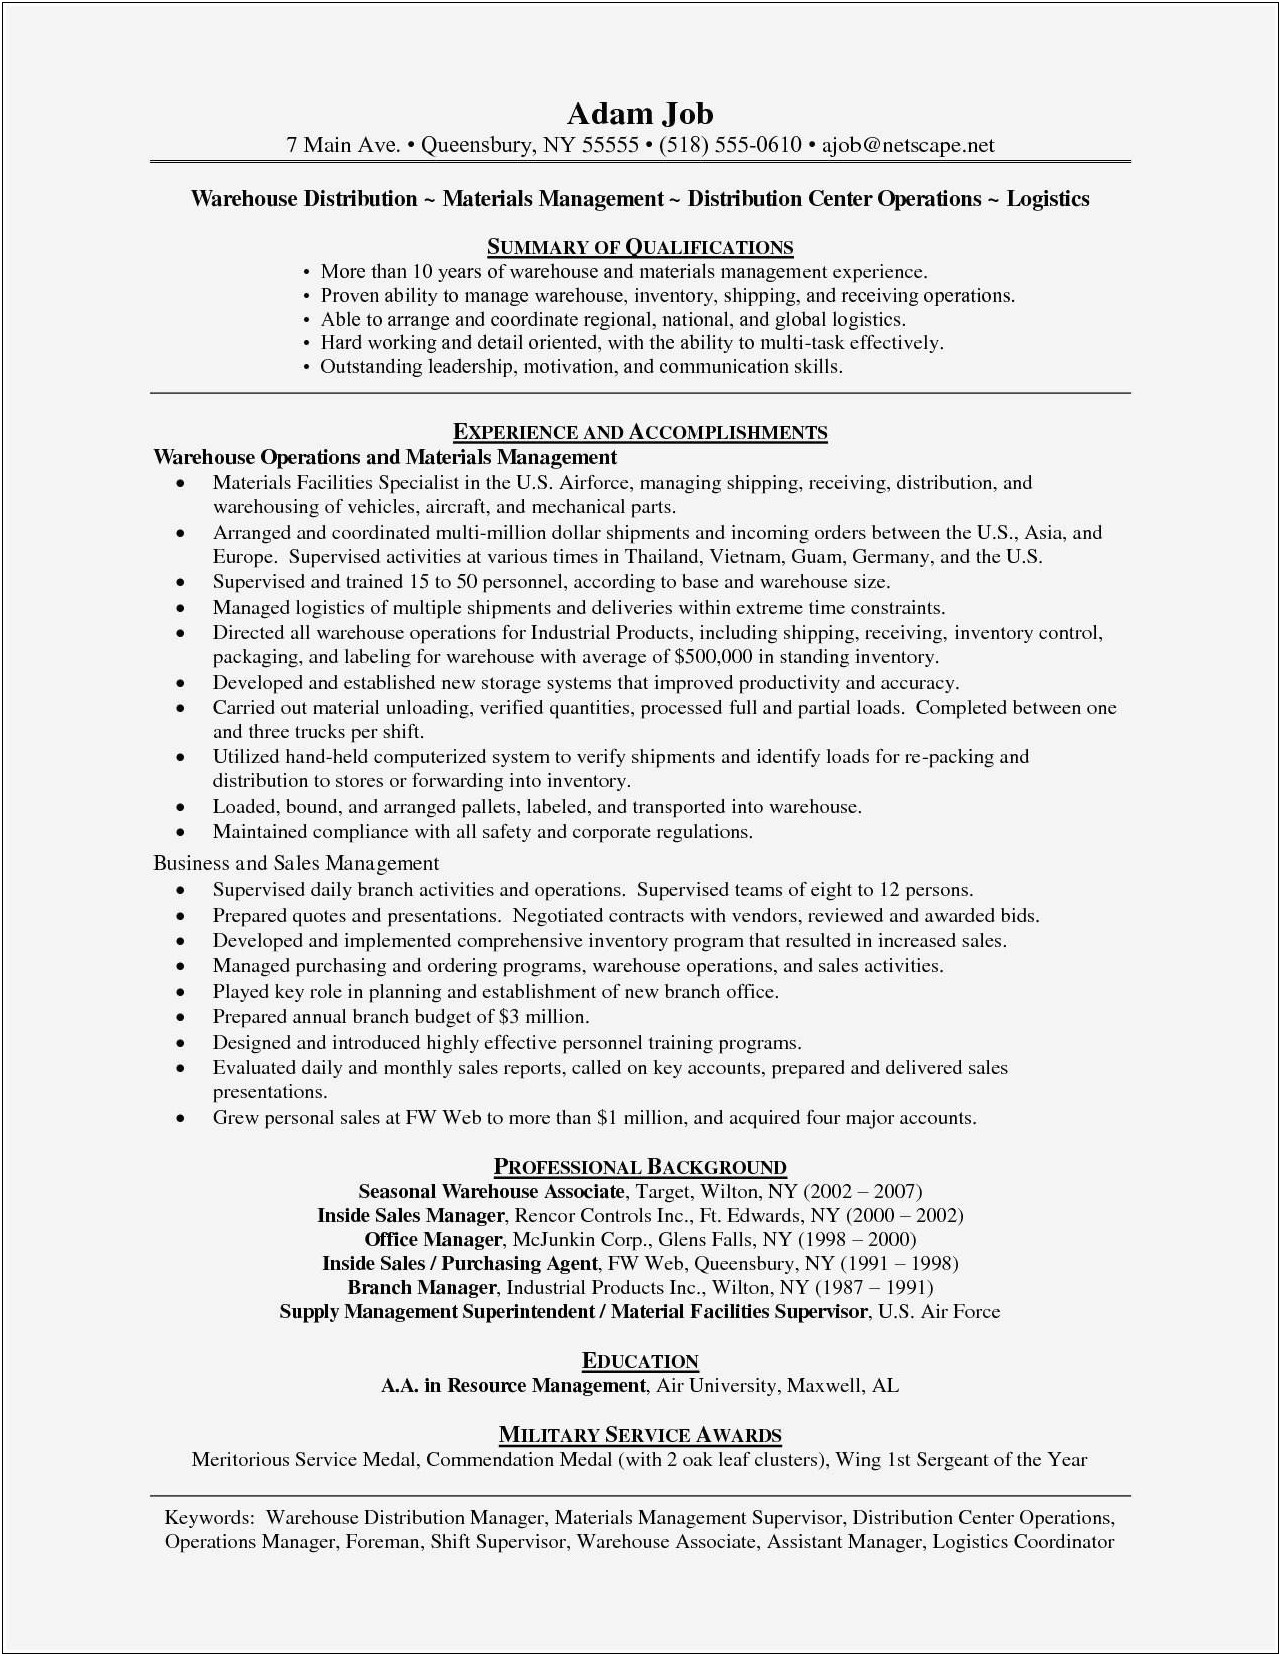 Resume Skills & Abilities Example For Warehouse